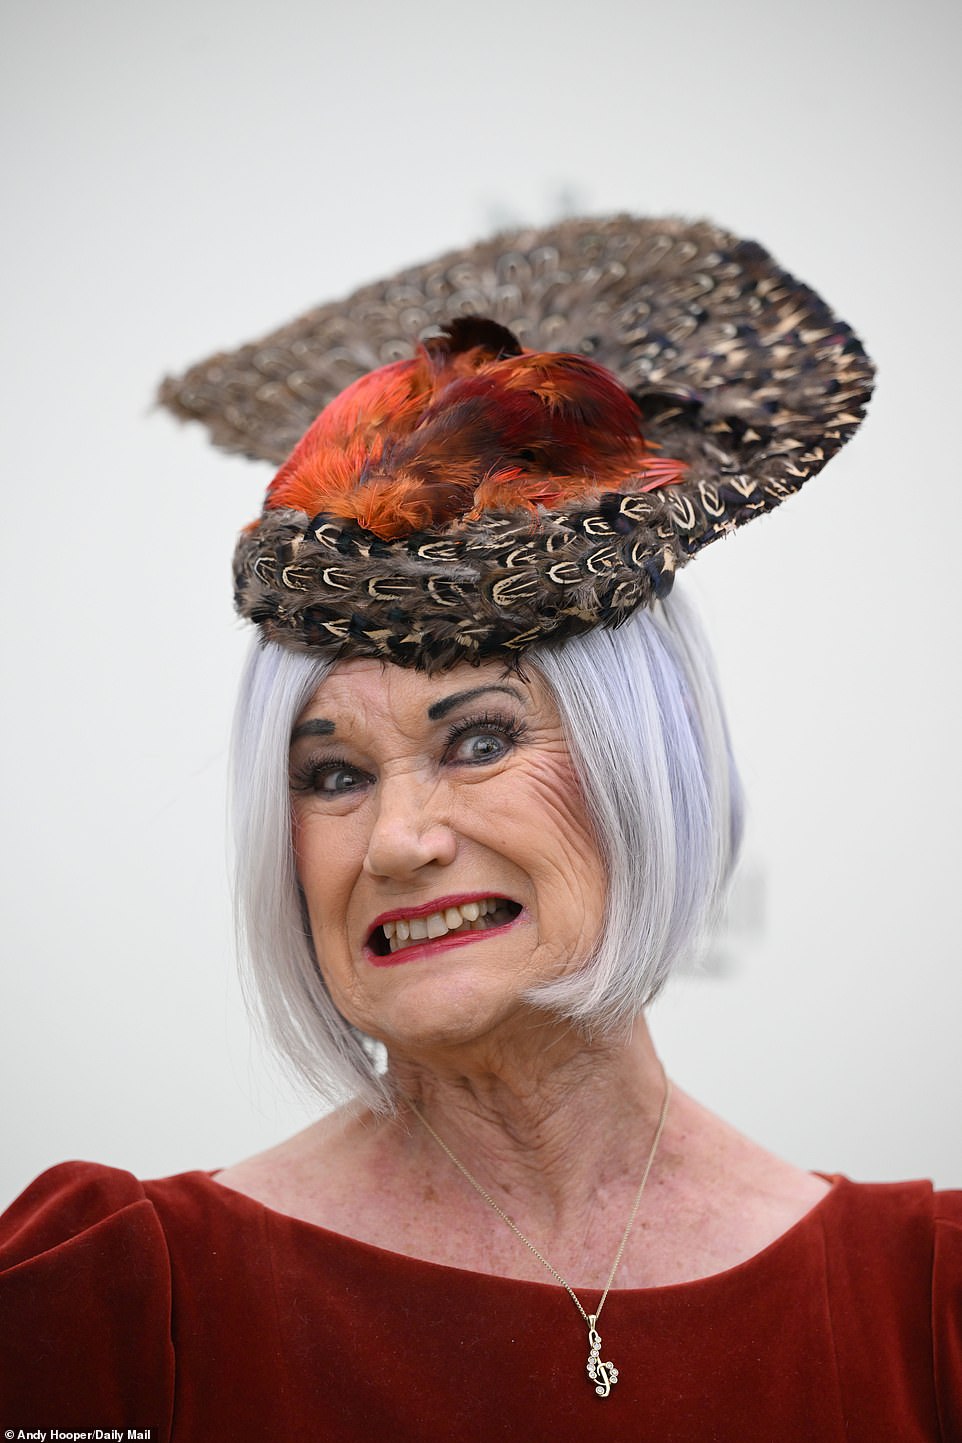 A lady shows off her extravagant hat, also known as a fascinator, with hats being a key part of the Cheltenham Festival dress code.